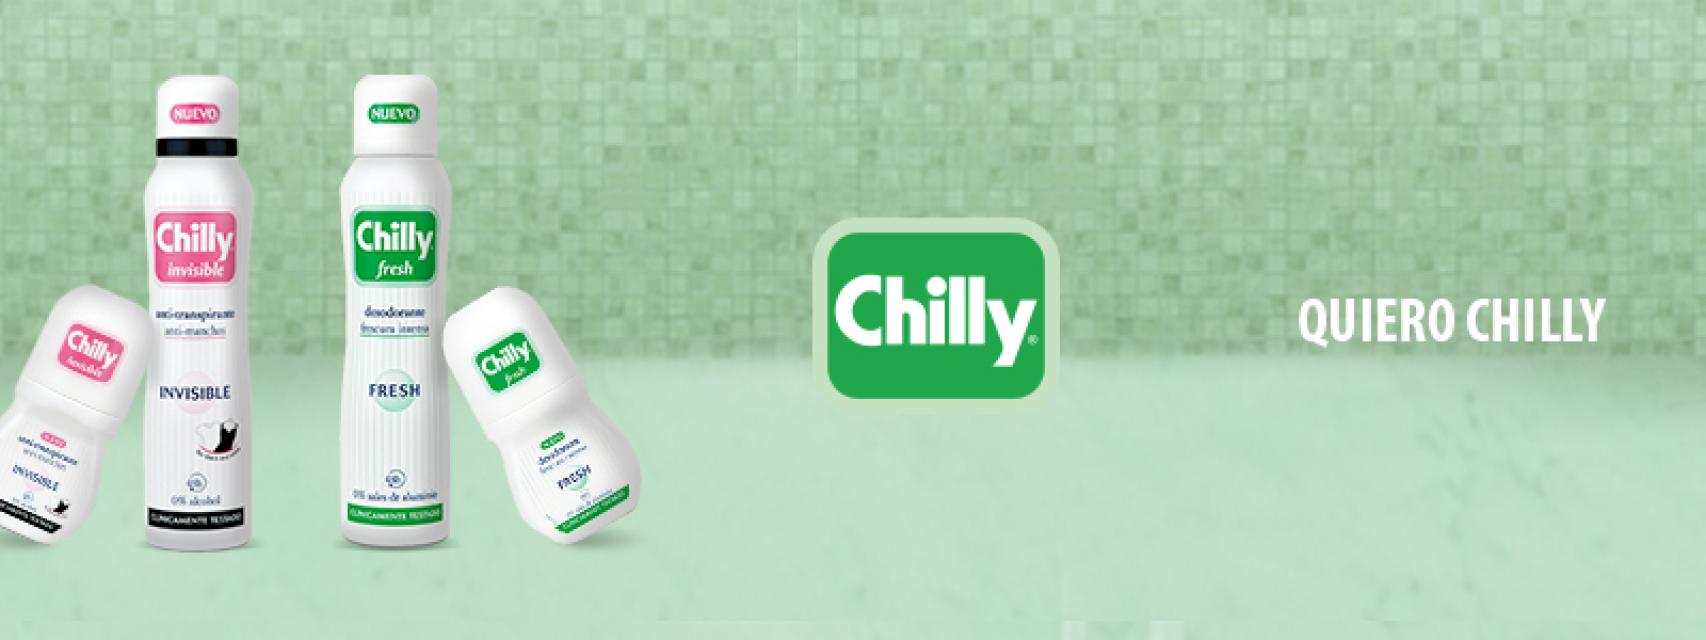 Productos Chilly